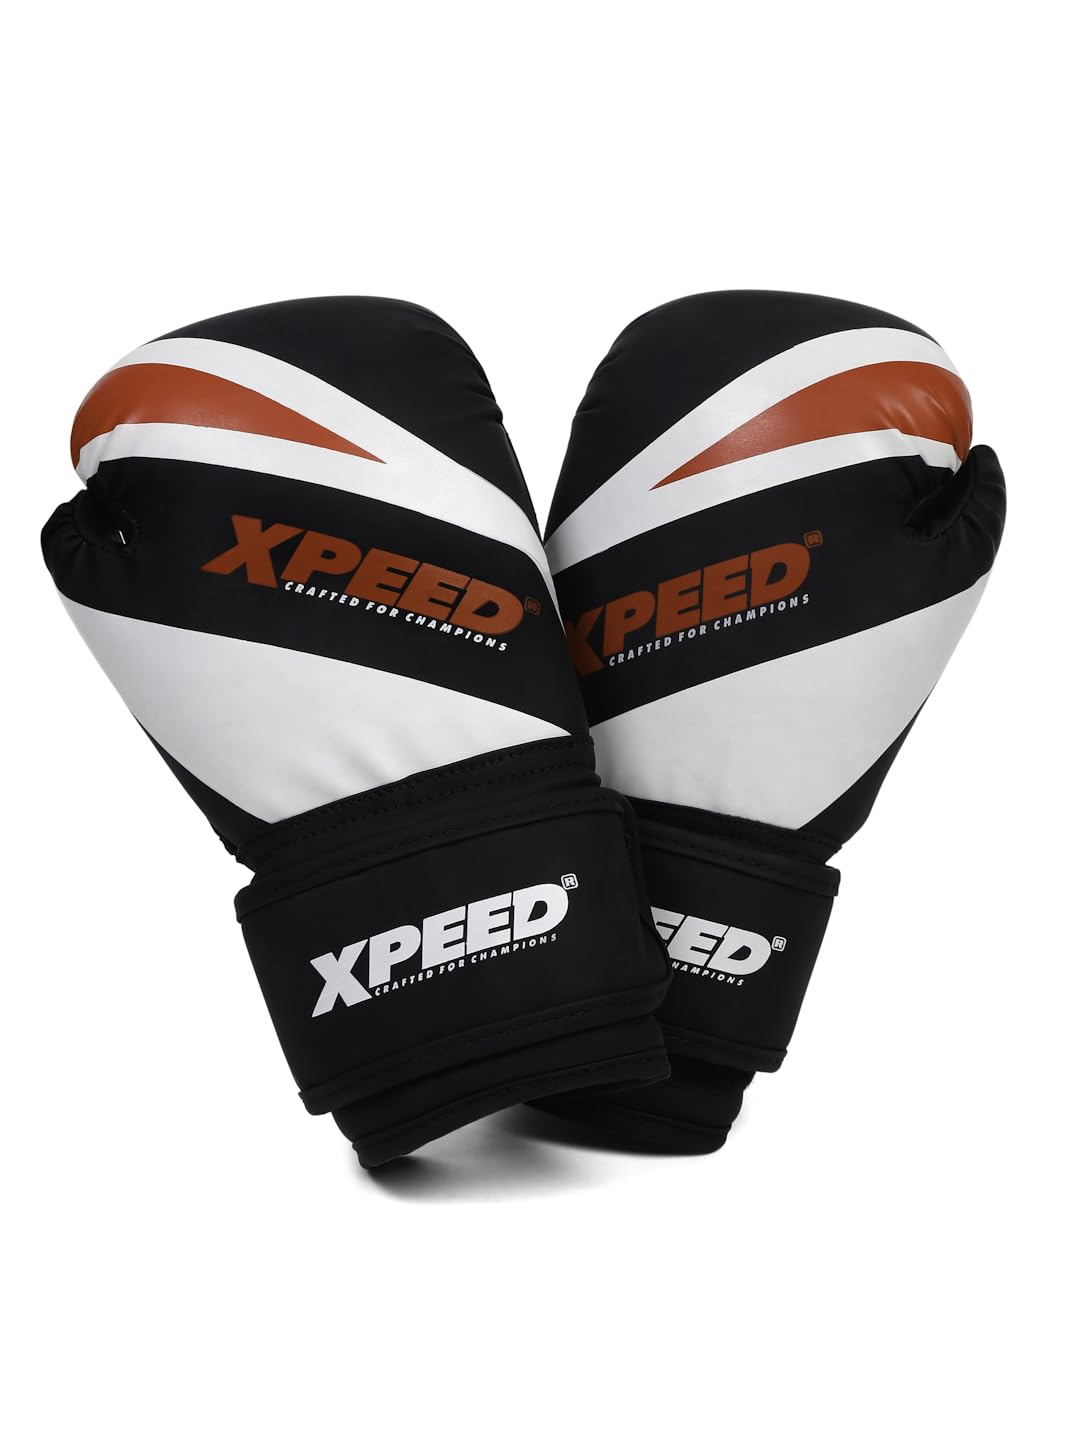 Xpeed Premium PU PMFT Sparring Gloves for Boxing|| MMA || Kickboxing || Muay Thai || Excellent Impact Resistance for Men & Women